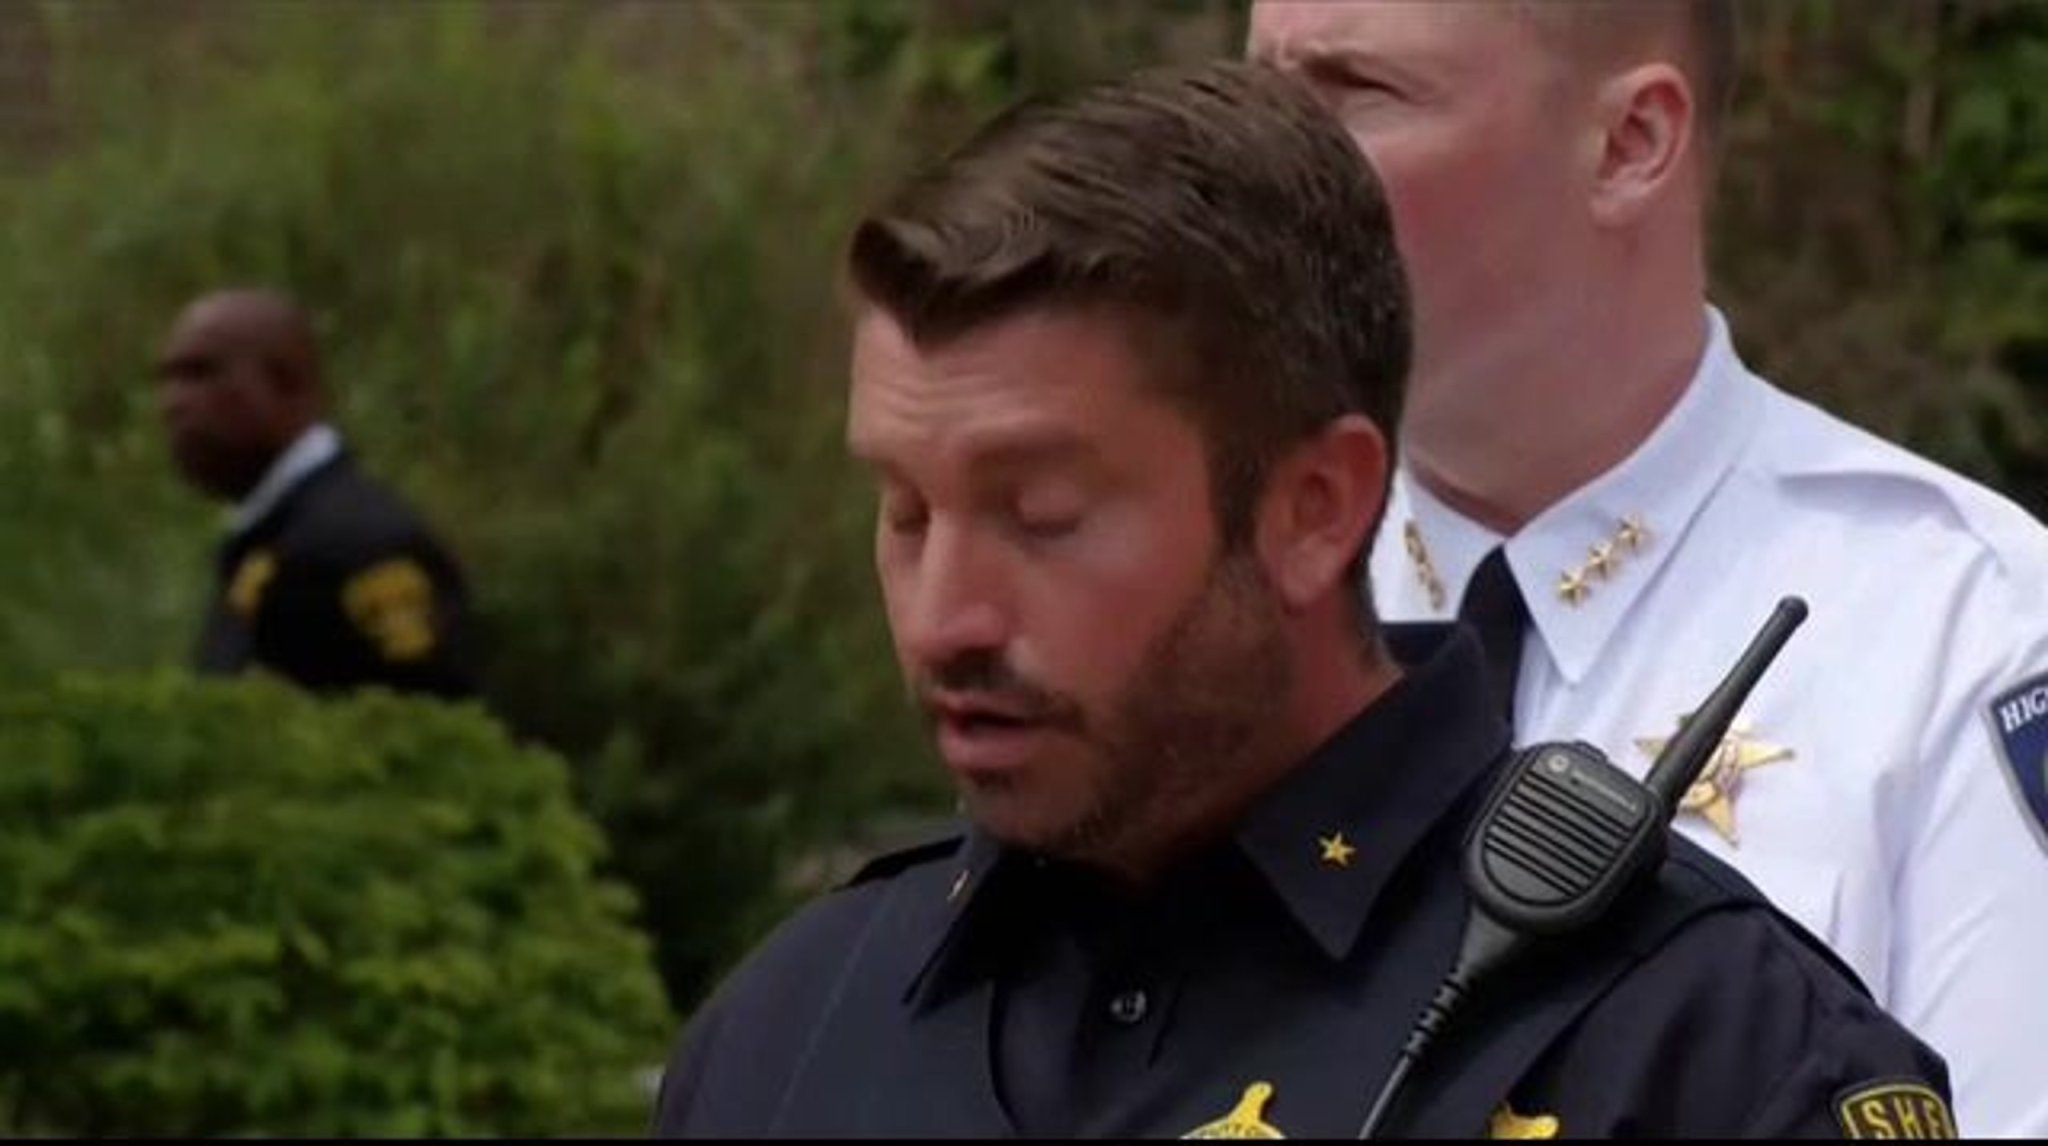 Sergeant Chris Covelli on the gun used in the July 4th shooting: "It appears to have been purchased legally."